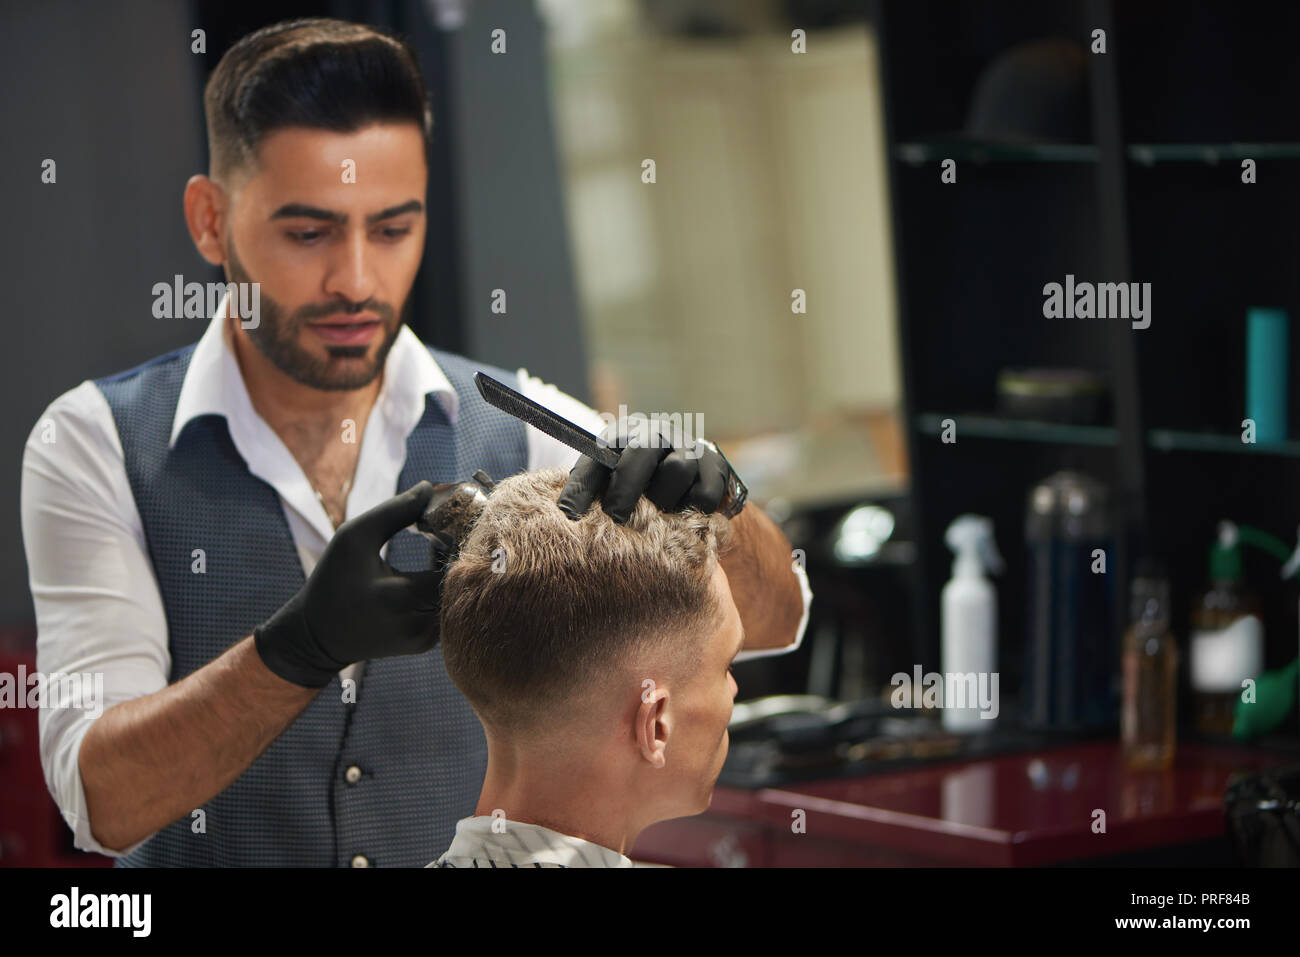 Concentrated Barber Looking At Client And Trimming Haircut Of